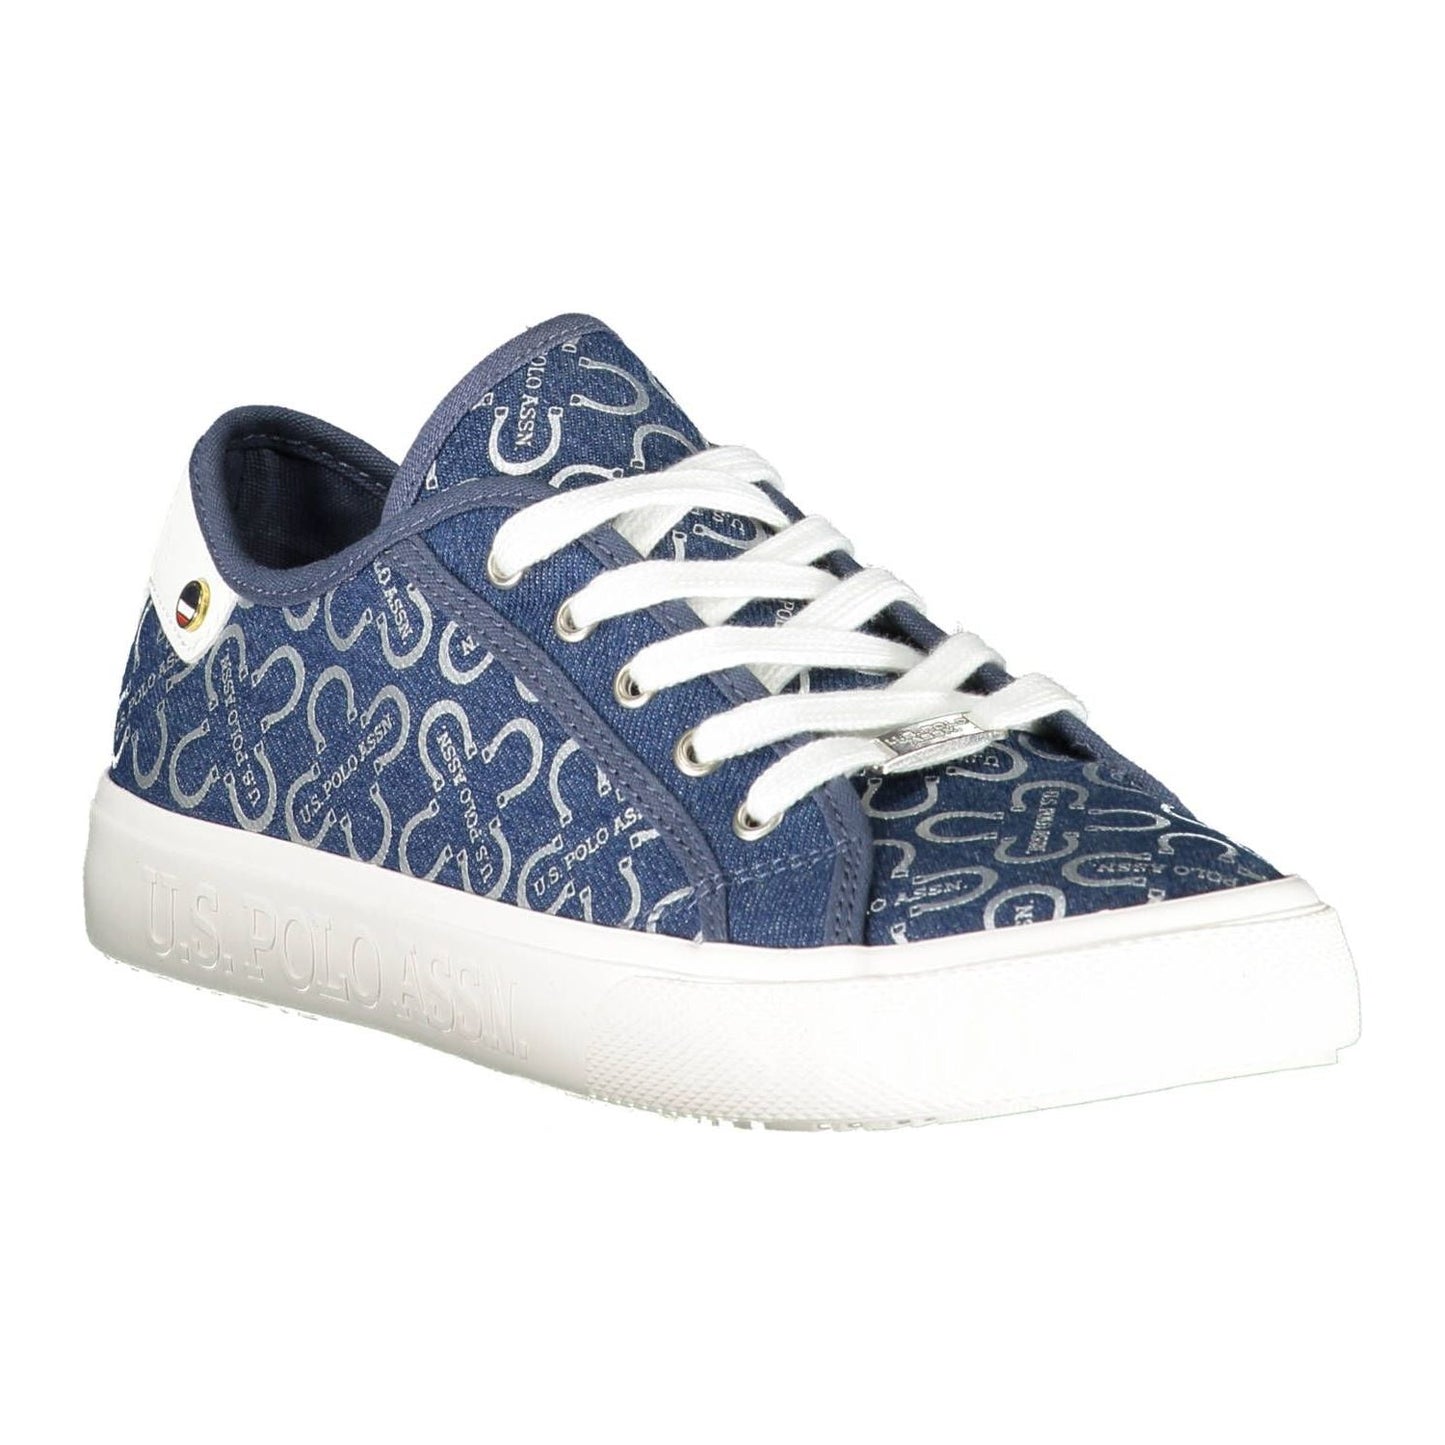 U.S. POLO ASSN.Chic Blue Lace-Up Sports SneakersMcRichard Designer Brands£99.00